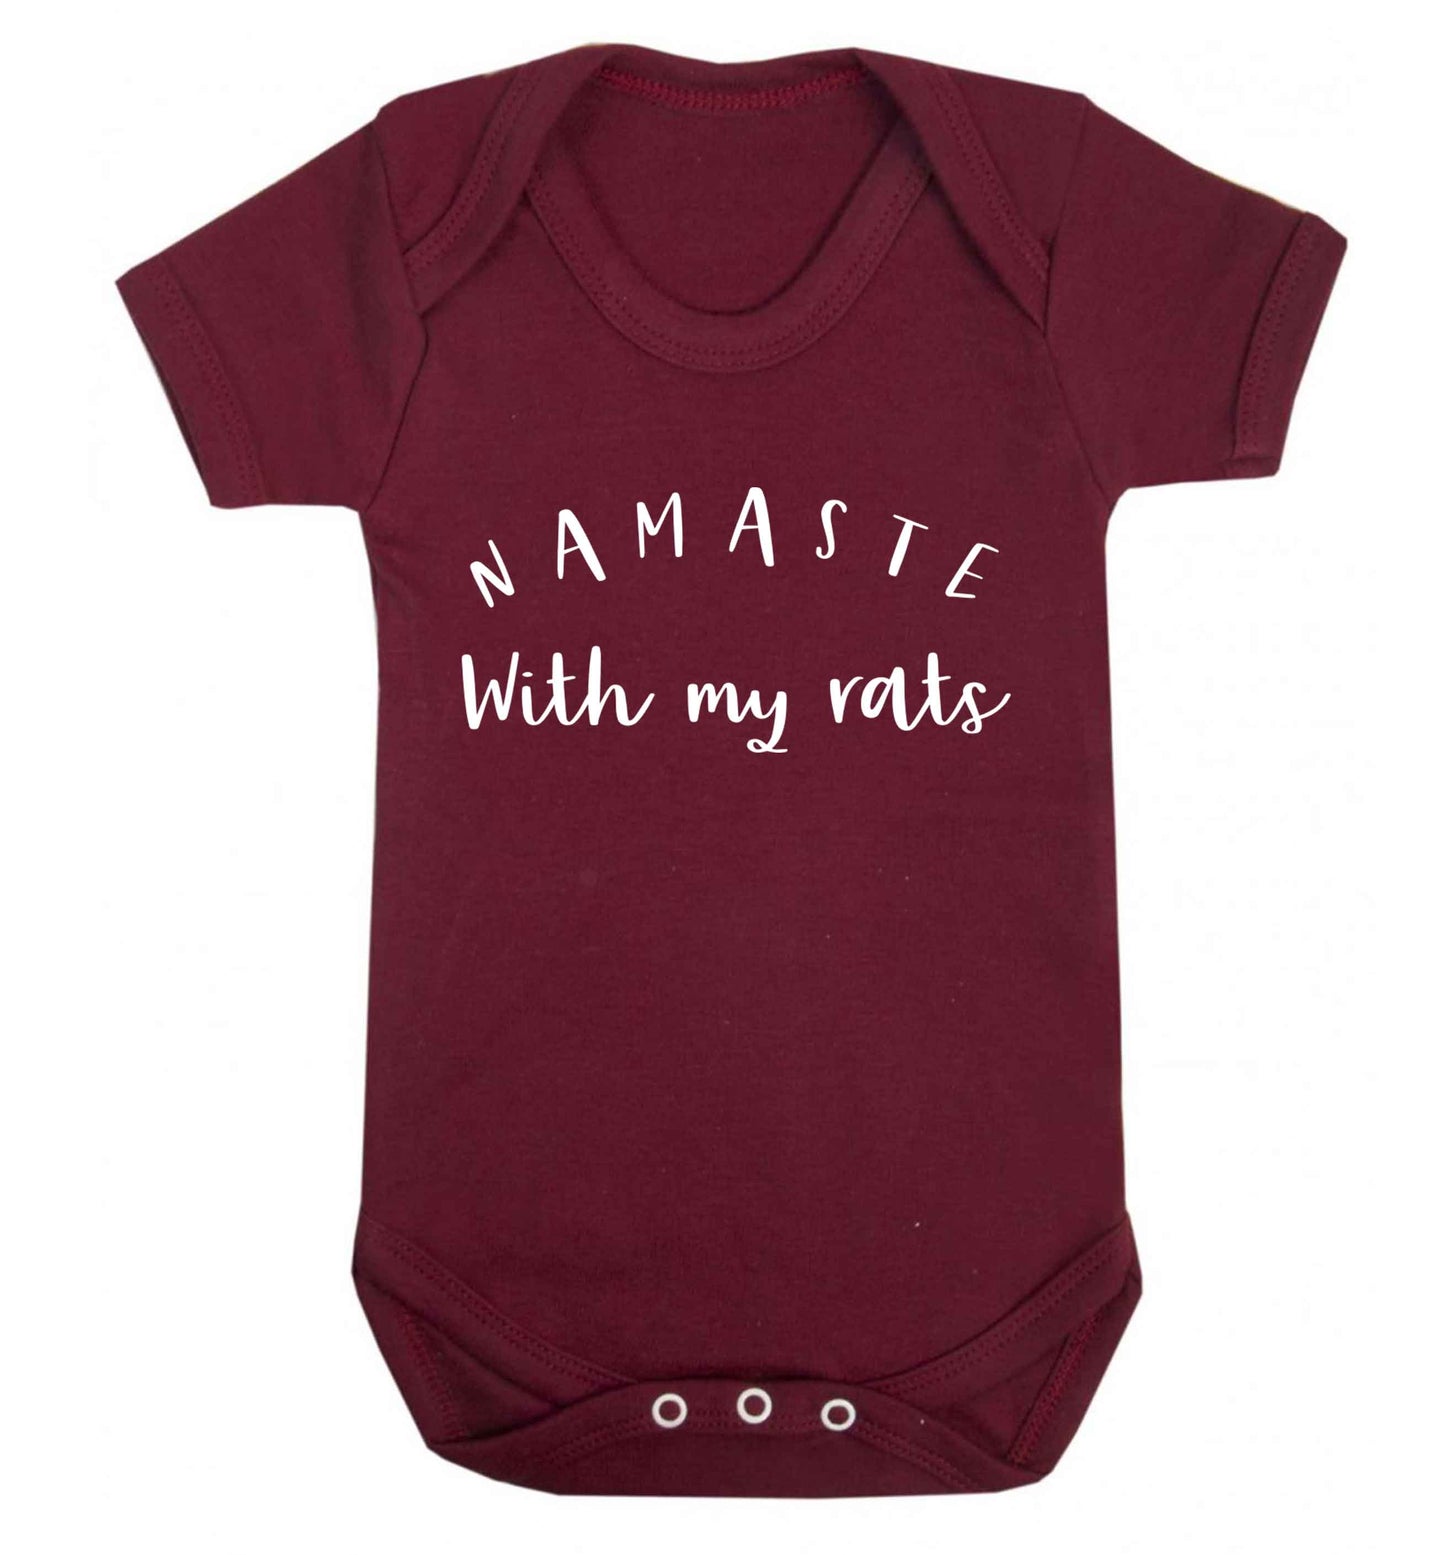 Namaste with my rats Baby Vest maroon 18-24 months